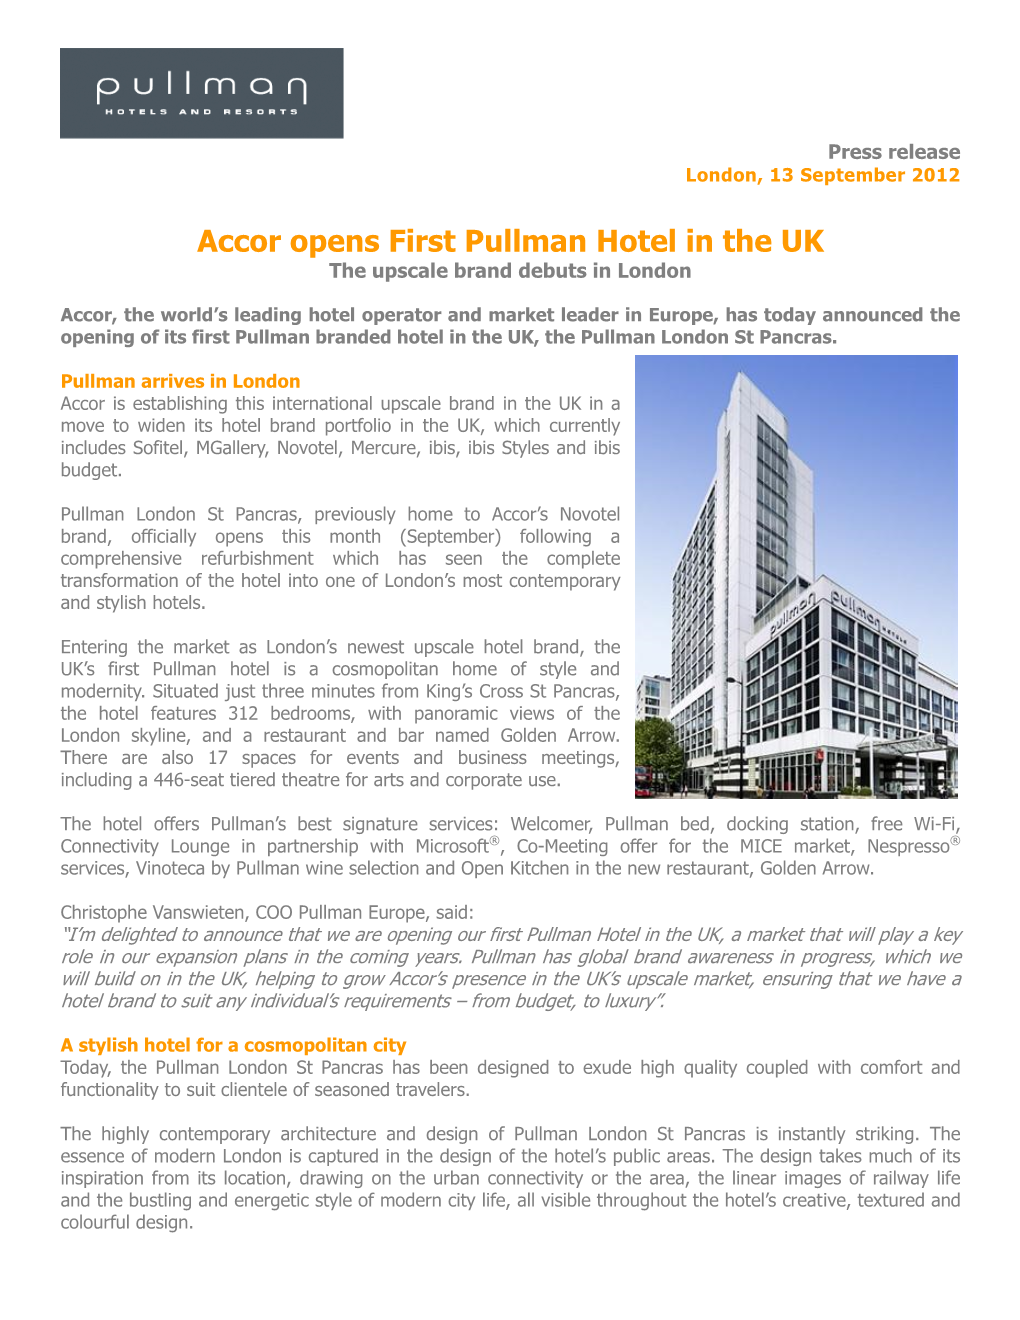 Accor Opens First Pullman Hotel in the UK the Upscale Brand Debuts in London